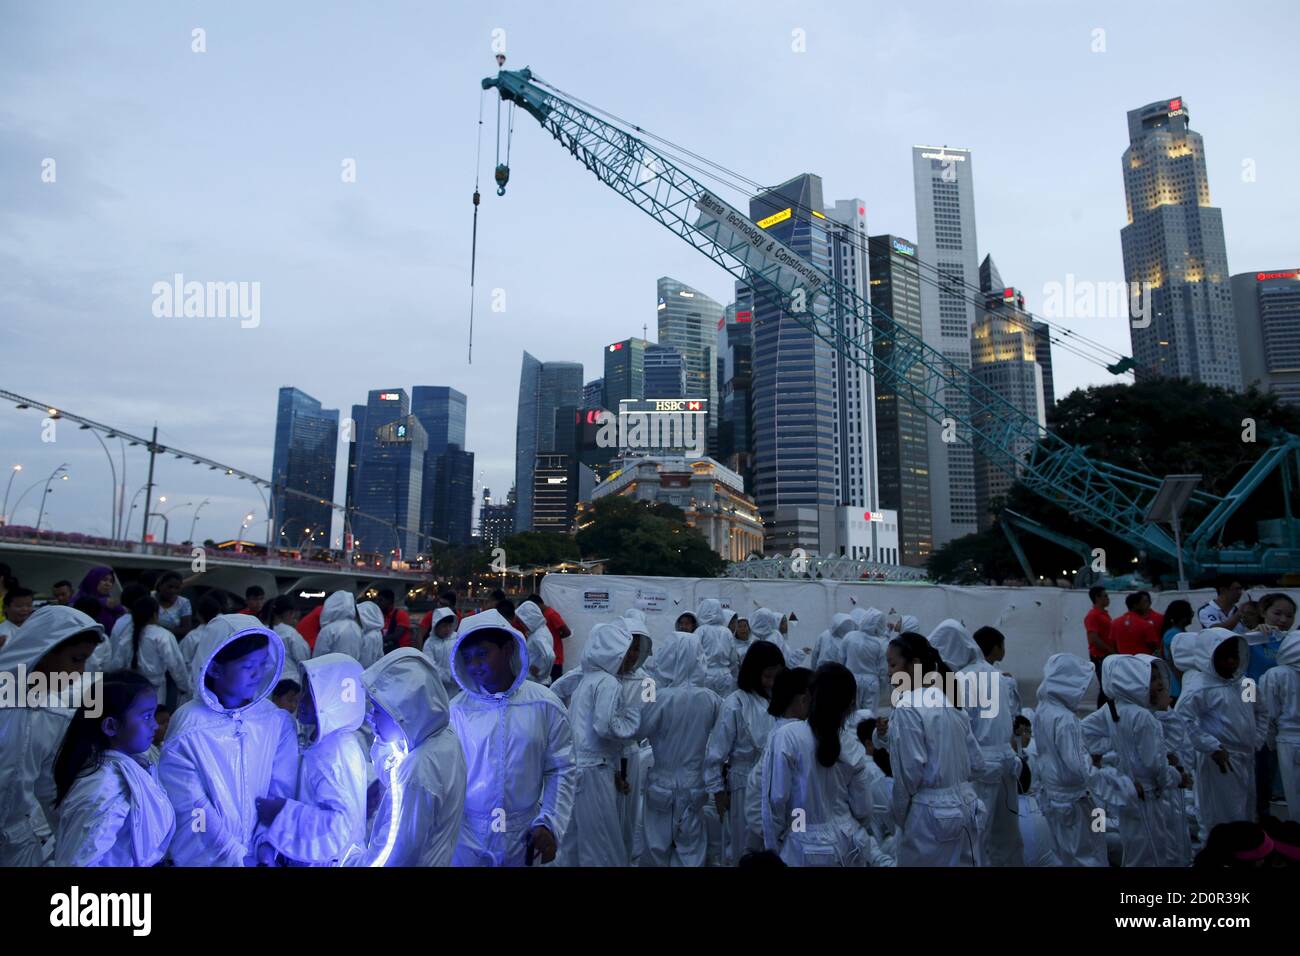 Children wearing costumes that light up with LED lights prepare to march into a National Day Golden Jubilee parade rehearsal at the Padang in Singapore July 25, 2015. The city-state's 50th independence day falls on August 9. REUTERS/Edgar Su Stock Photo